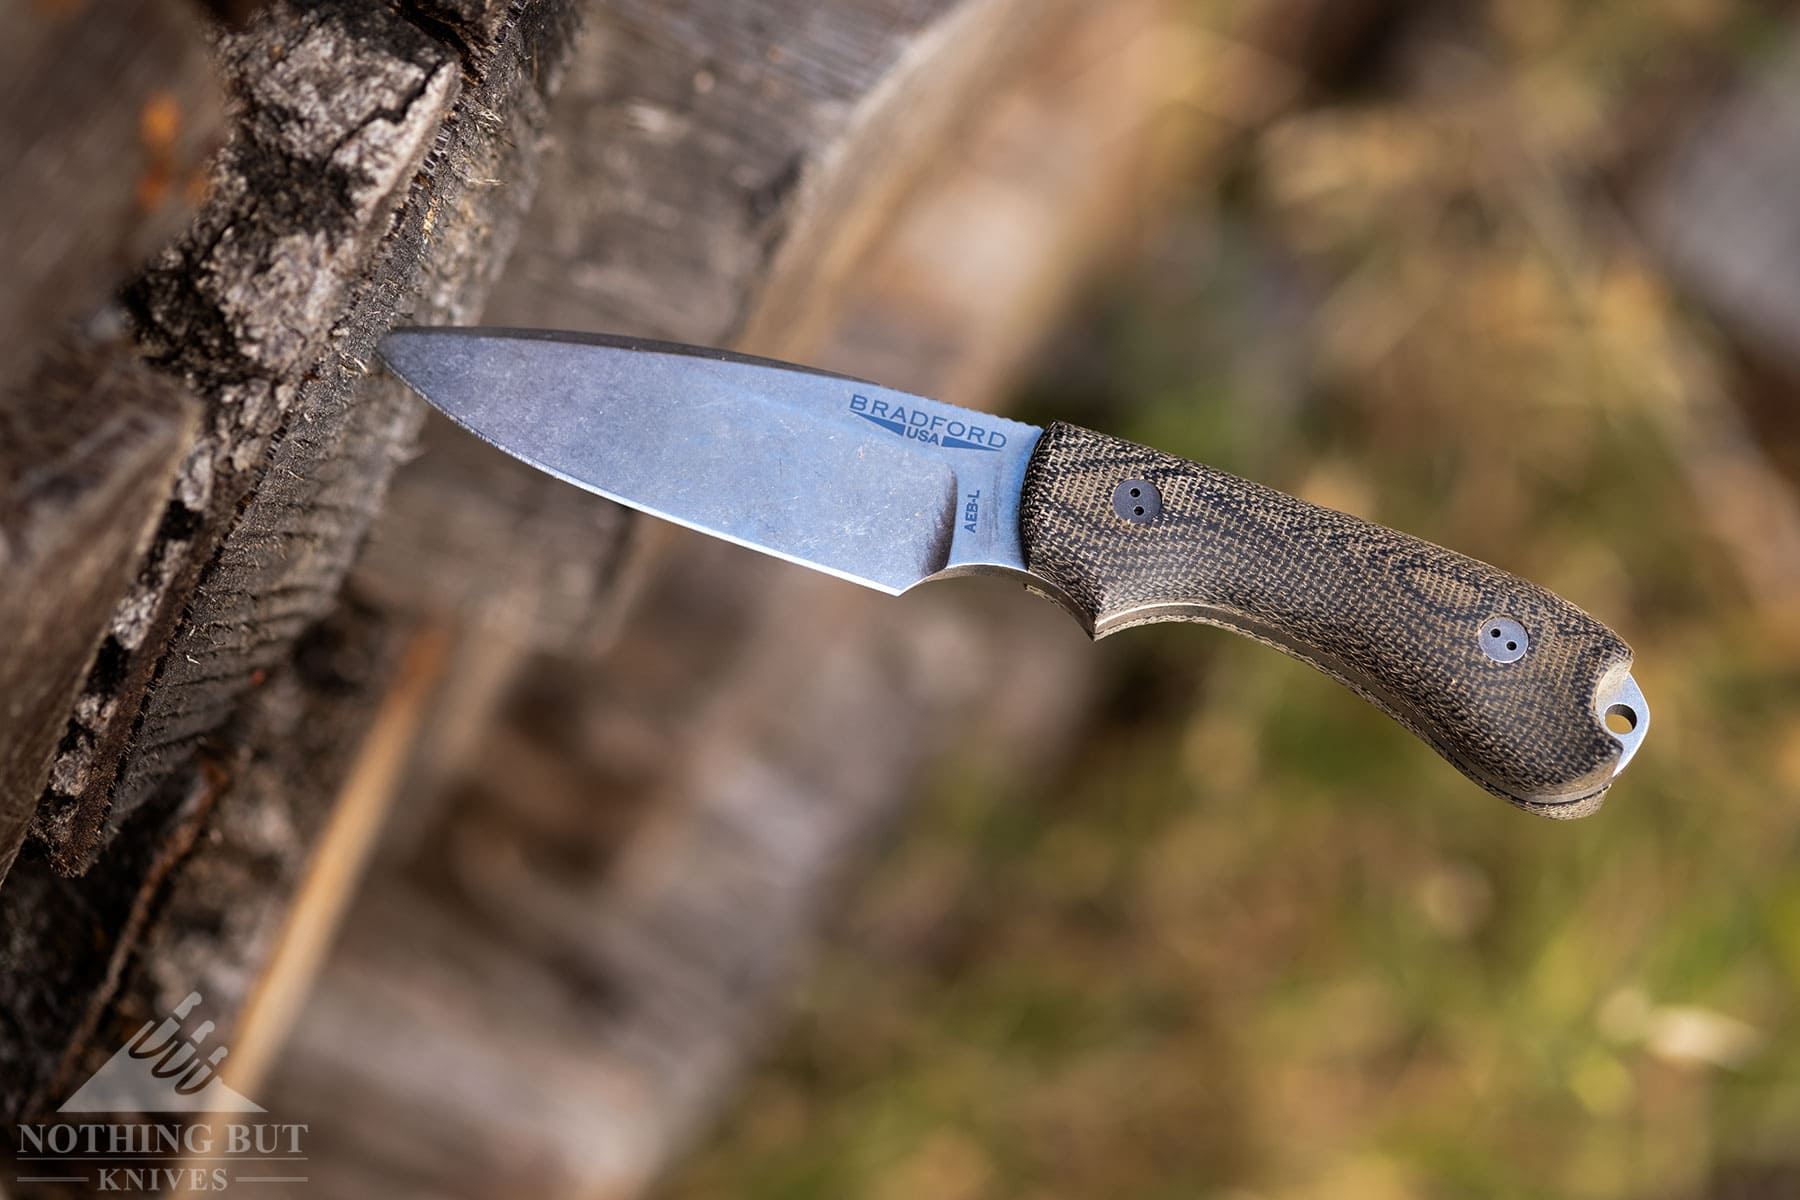 Bradford has made the Guardian 3 available in a variety of handle and steel options, but we are partial to the original version with AEB-L and Micarta.